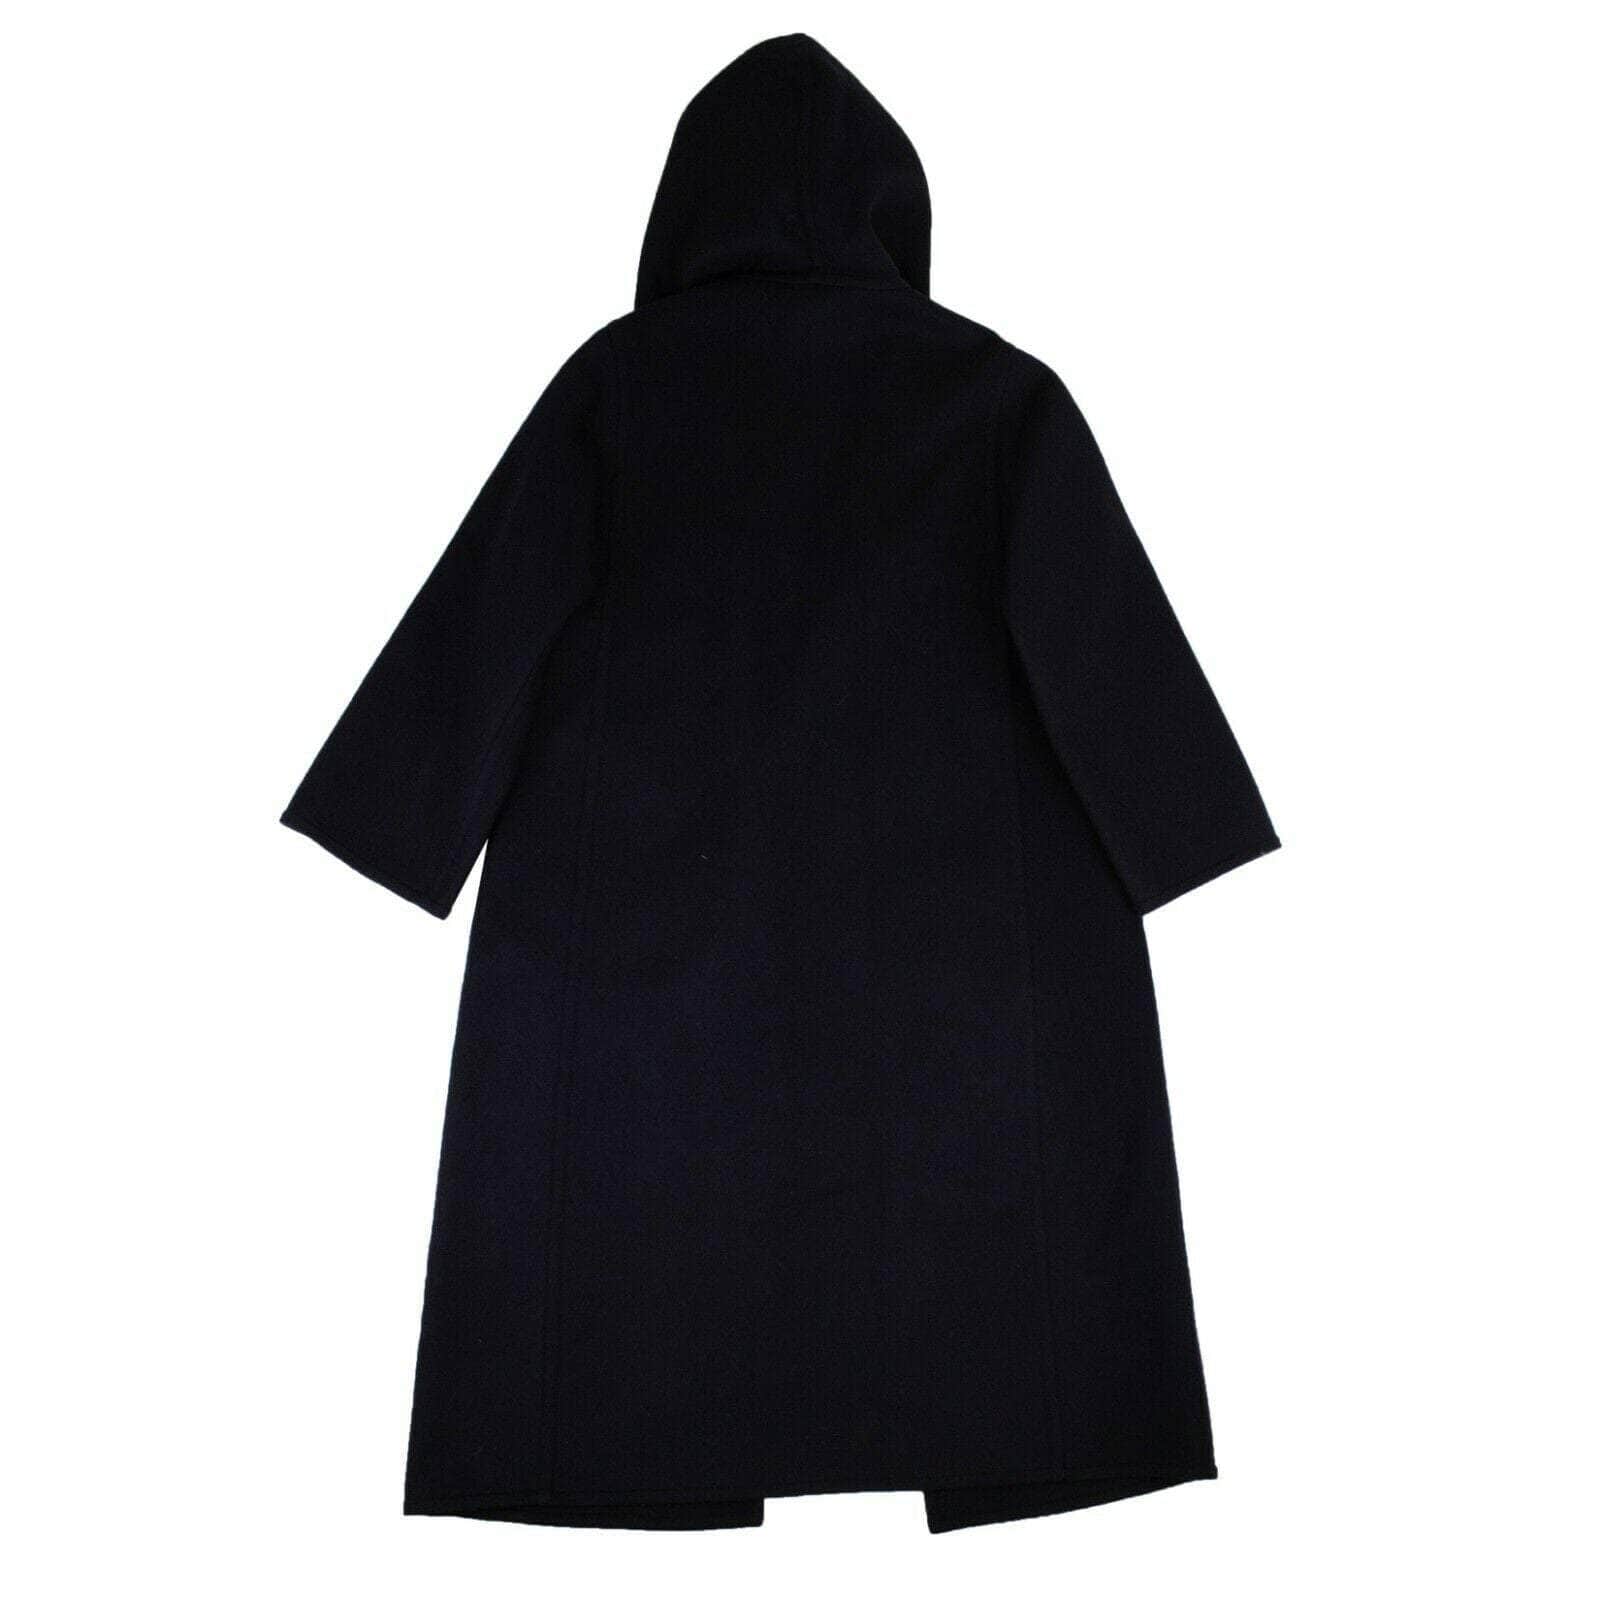 A_PLAN_APPLICATION 750-1000, a_plan_application, channelenable-all, couponcollection, gender-womens, main-clothing, size-s, womens-coats S Navy Blue Hooded Oversized Coat 82NGG-AP-36/S 82NGG-AP-36/S